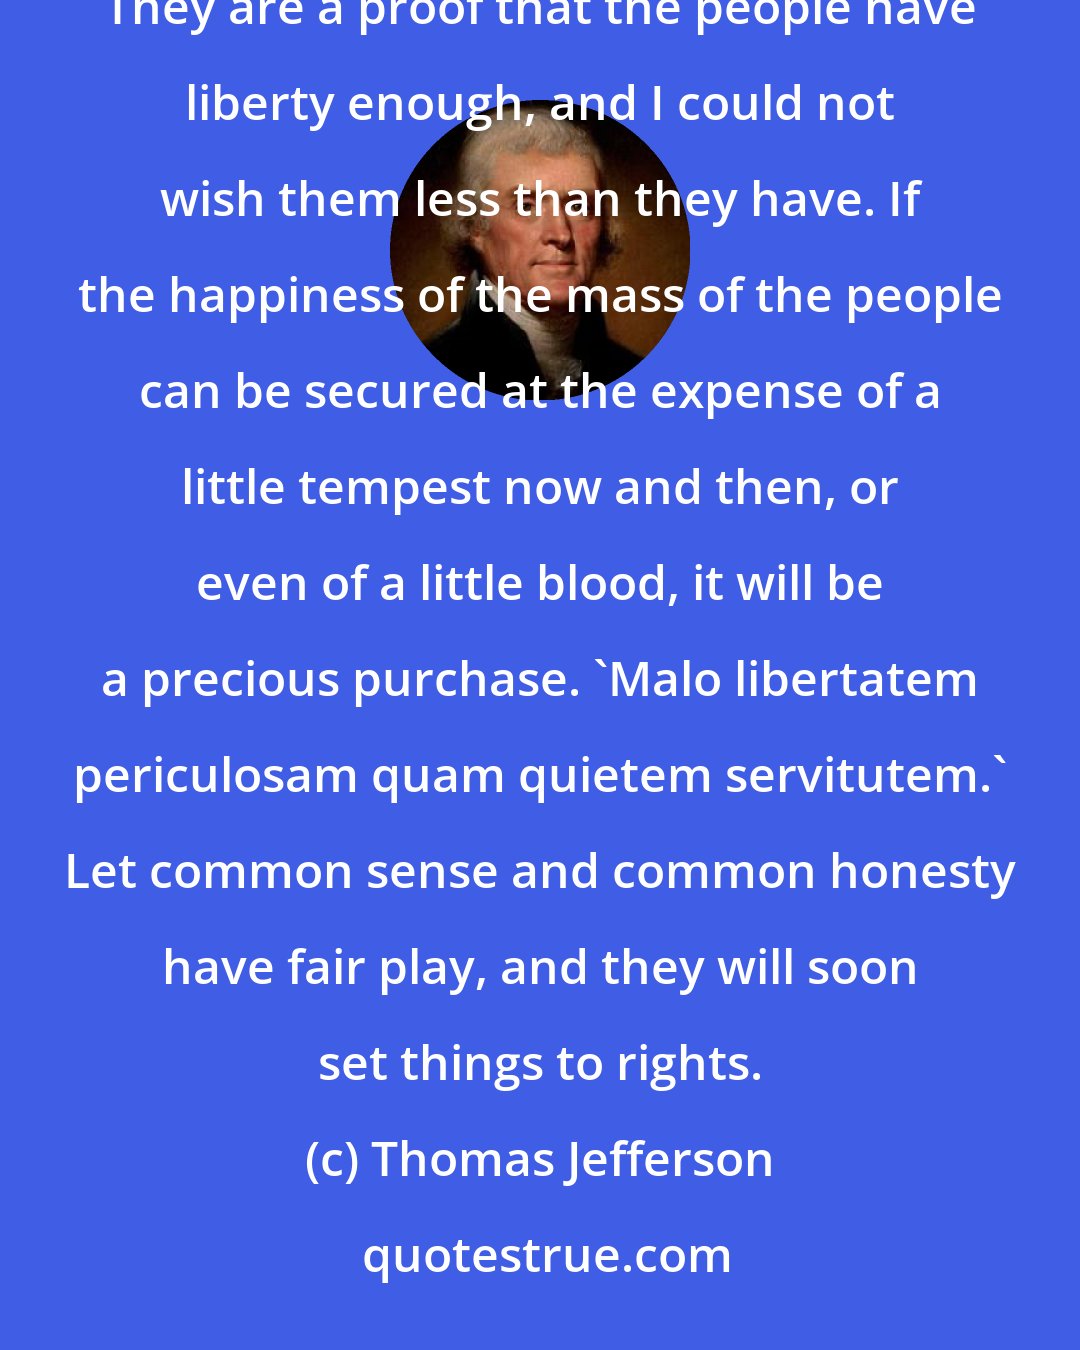 Thomas Jefferson: The commotions that have taken place in America, as far as they are yet known to me, offer nothing threatening. They are a proof that the people have liberty enough, and I could not wish them less than they have. If the happiness of the mass of the people can be secured at the expense of a little tempest now and then, or even of a little blood, it will be a precious purchase. 'Malo libertatem periculosam quam quietem servitutem.' Let common sense and common honesty have fair play, and they will soon set things to rights.